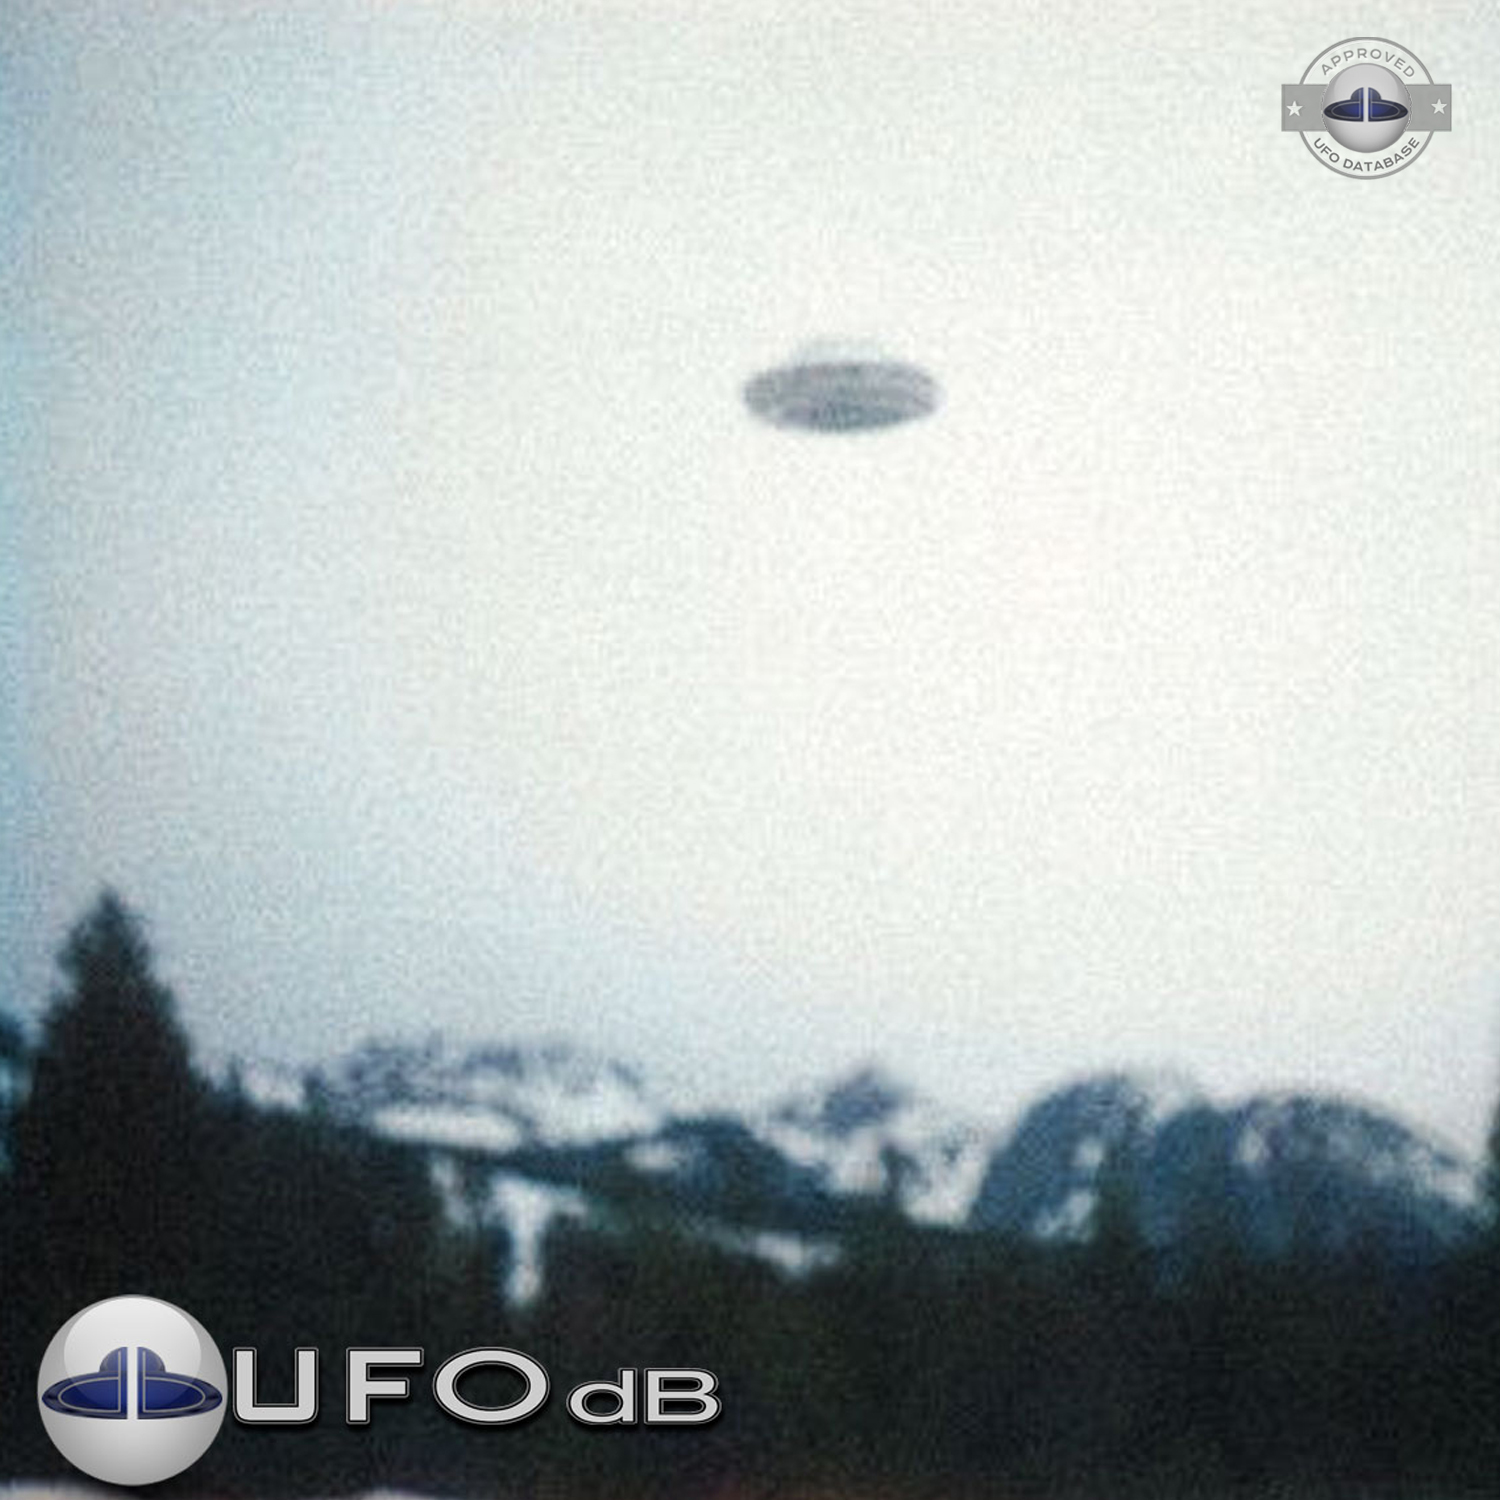 UFO picture showing UFO over snowy mountains during the day UFO Picture #36-2